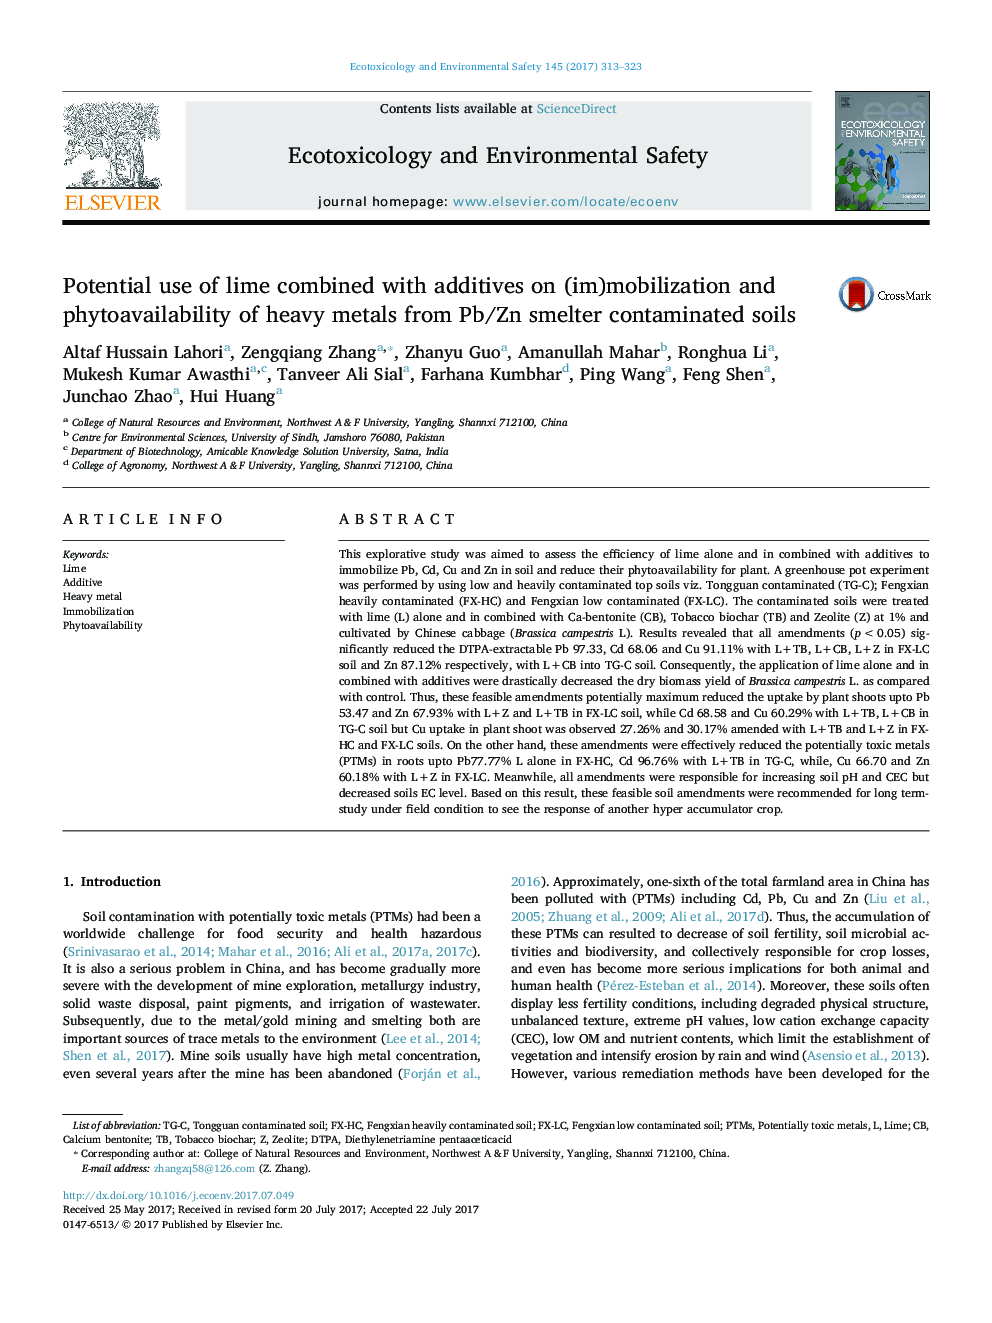 Potential use of lime combined with additives on (im)mobilization and phytoavailability of heavy metals from Pb/Zn smelter contaminated soils